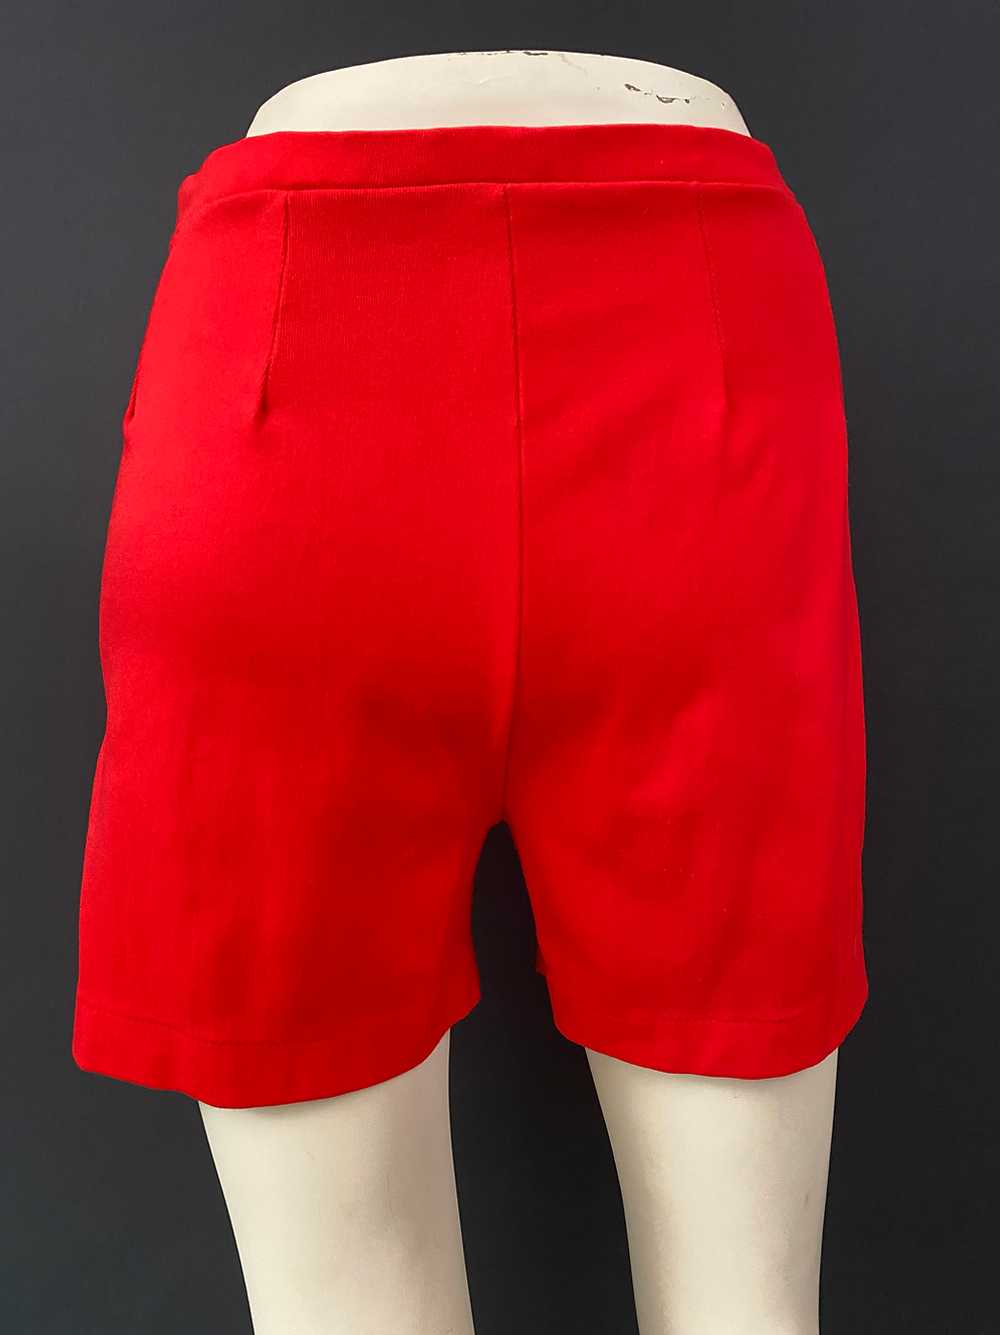 60s/70s Red Mod Pull On Shorts - image 6